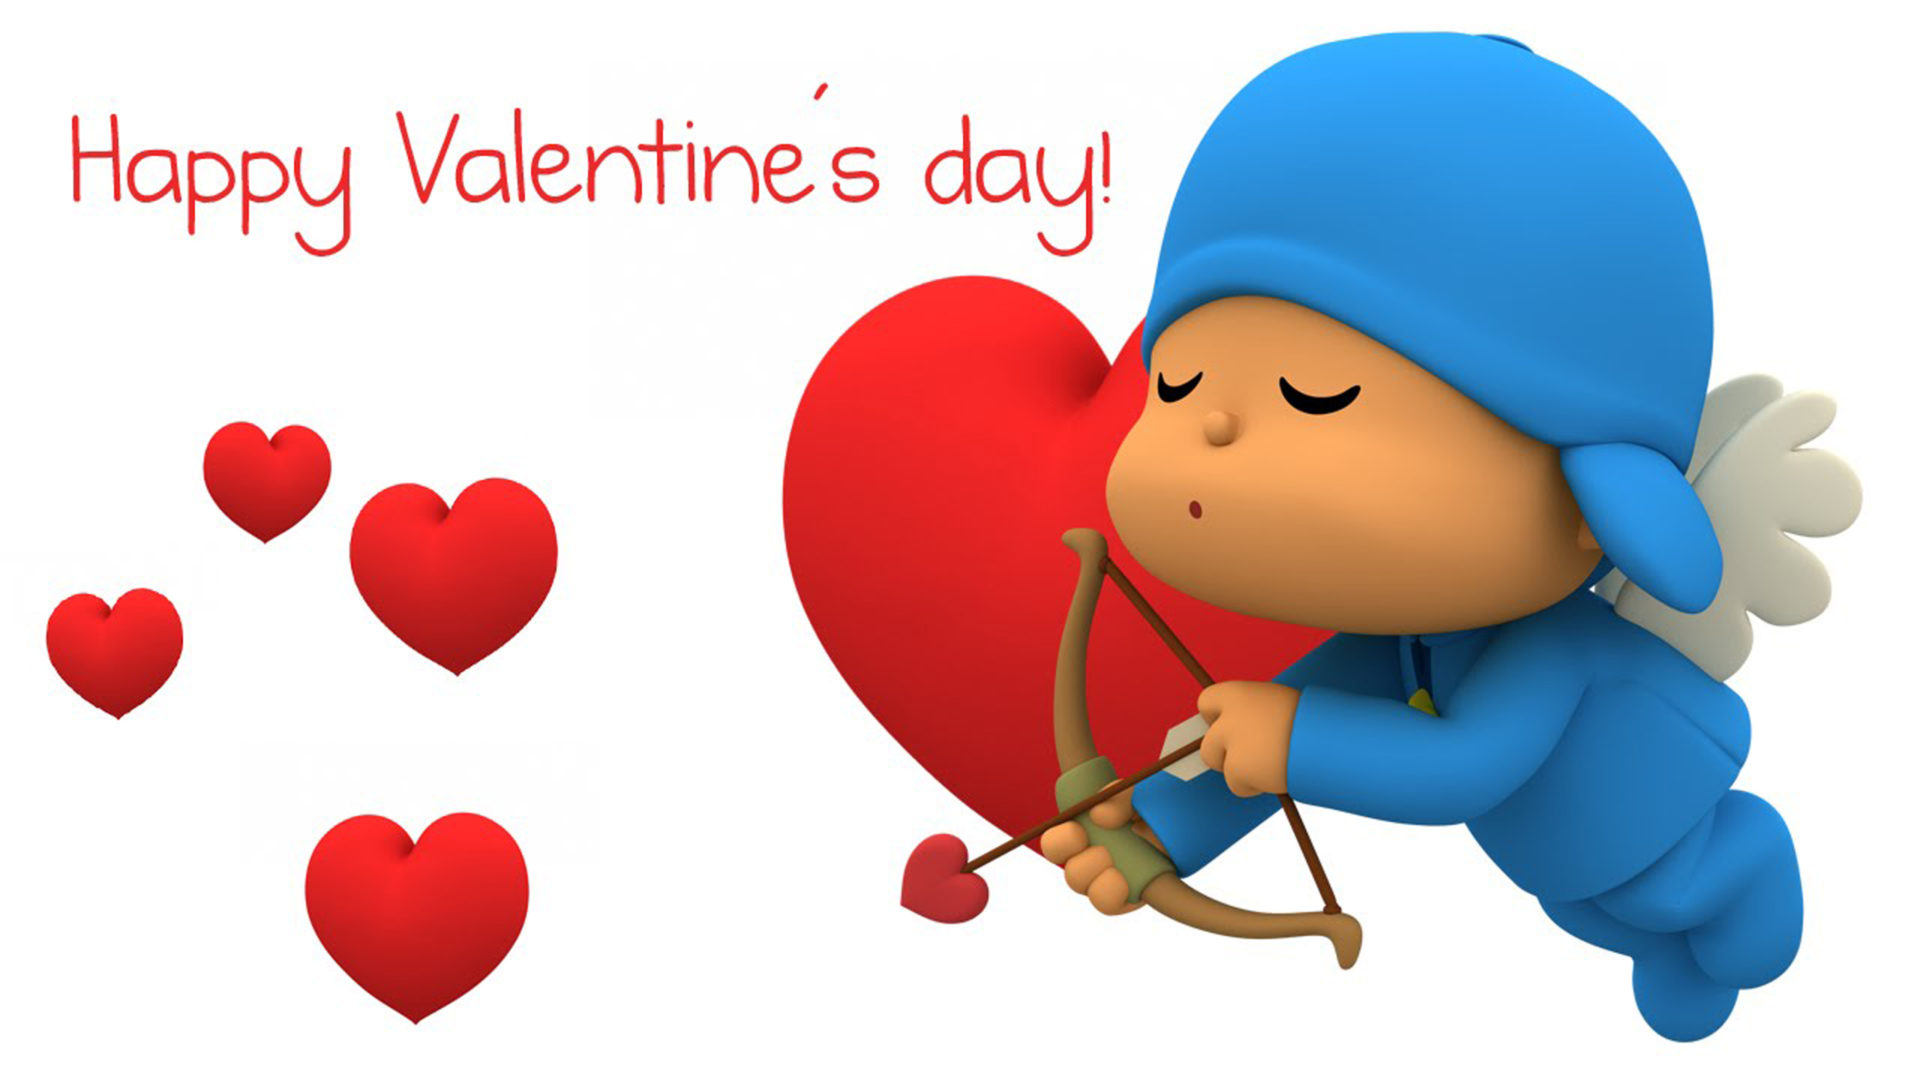 Happy Valentines Day Bow Arrow Hearts Cupid Animated Graphic HD, Wallpaper13.com